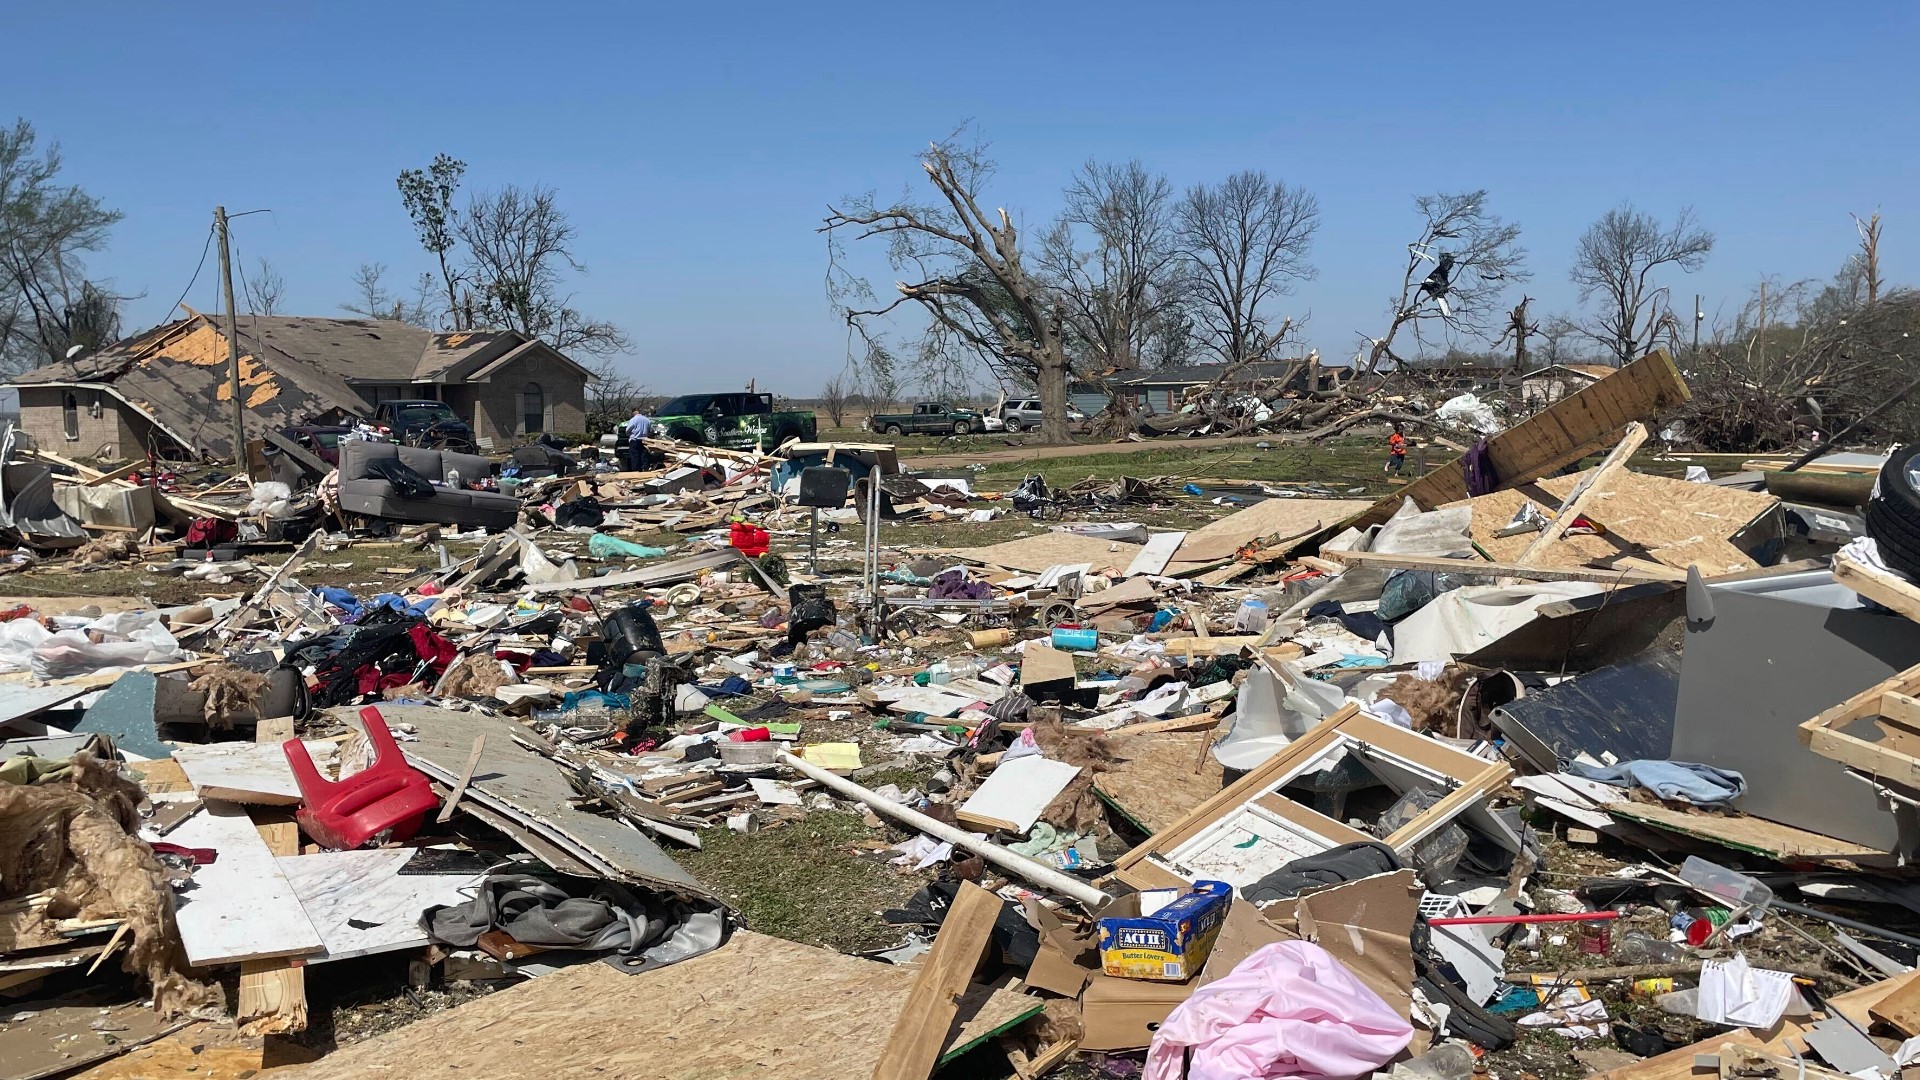 Hundreds in Mississippi are left homeless after a rural town outside of Jackson suffered the destruction. Many clean-up efforts are in the organization phase.